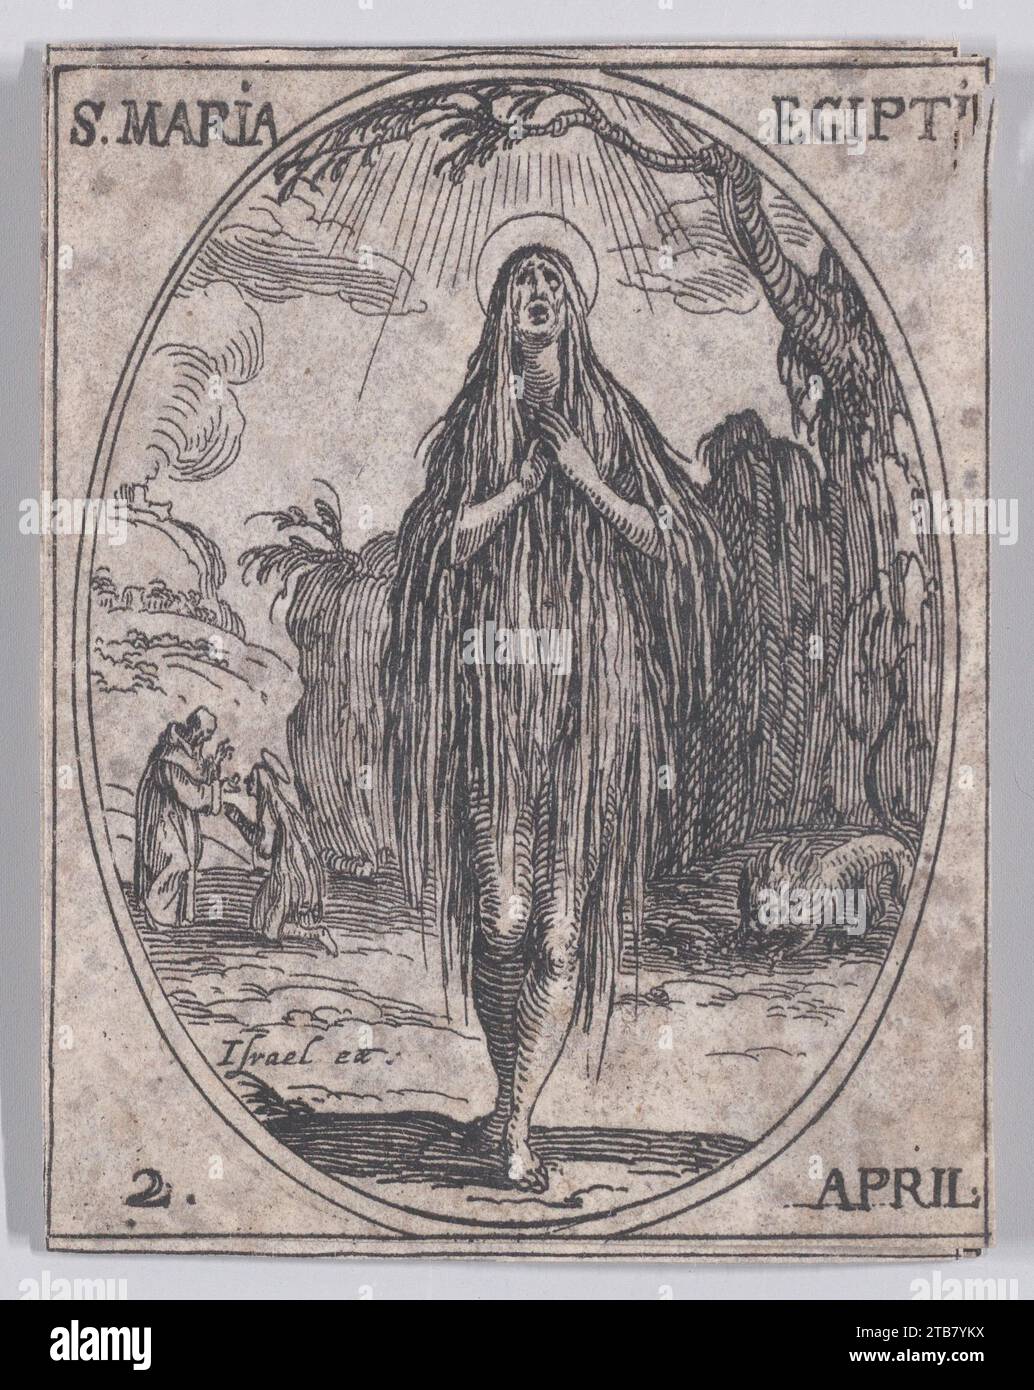 S. Marie Egyptienne (St. Mary of Egypt), April 2nd, from 'Les Images De Tous Les Saincts et Saintes de L'Annee' (Images of All of the Saints and Religious Events of the Year) 1917 by Jacques Callot Stock Photo